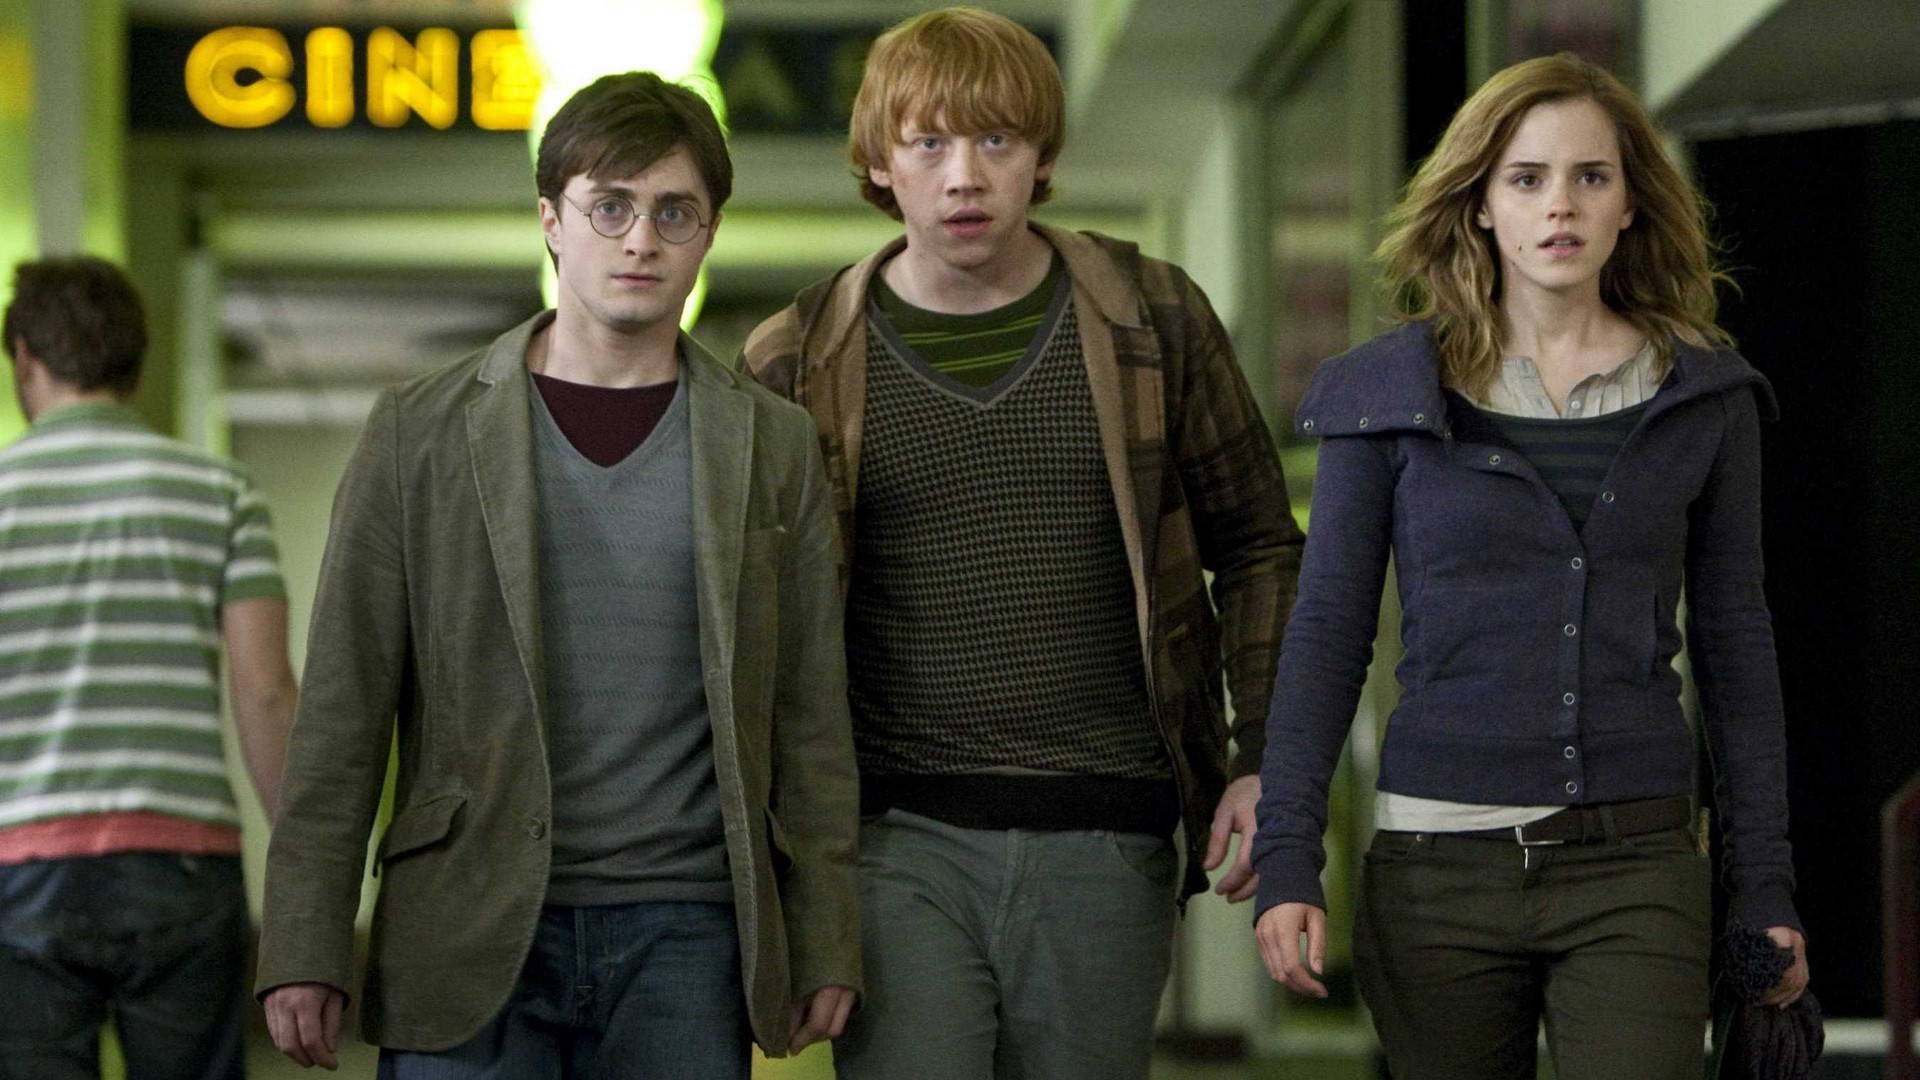 android harry potter, movie, harry potter and the deathly hallows: part 1, daniel radcliffe, emma watson, hermione granger, ron weasley, rupert grint